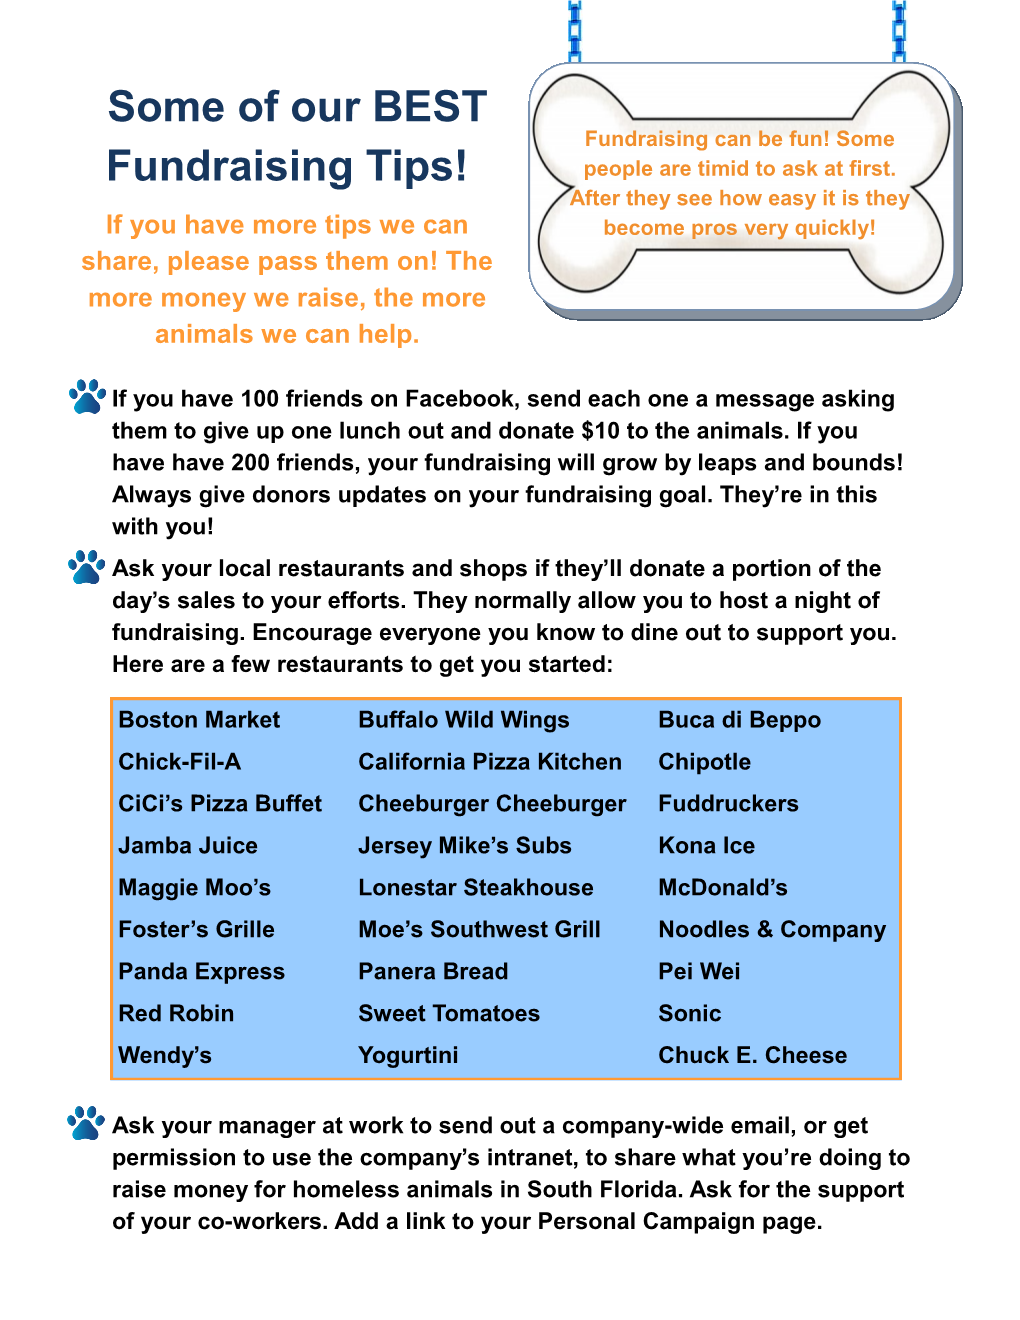 Some of Our BEST Fundraising Tips!